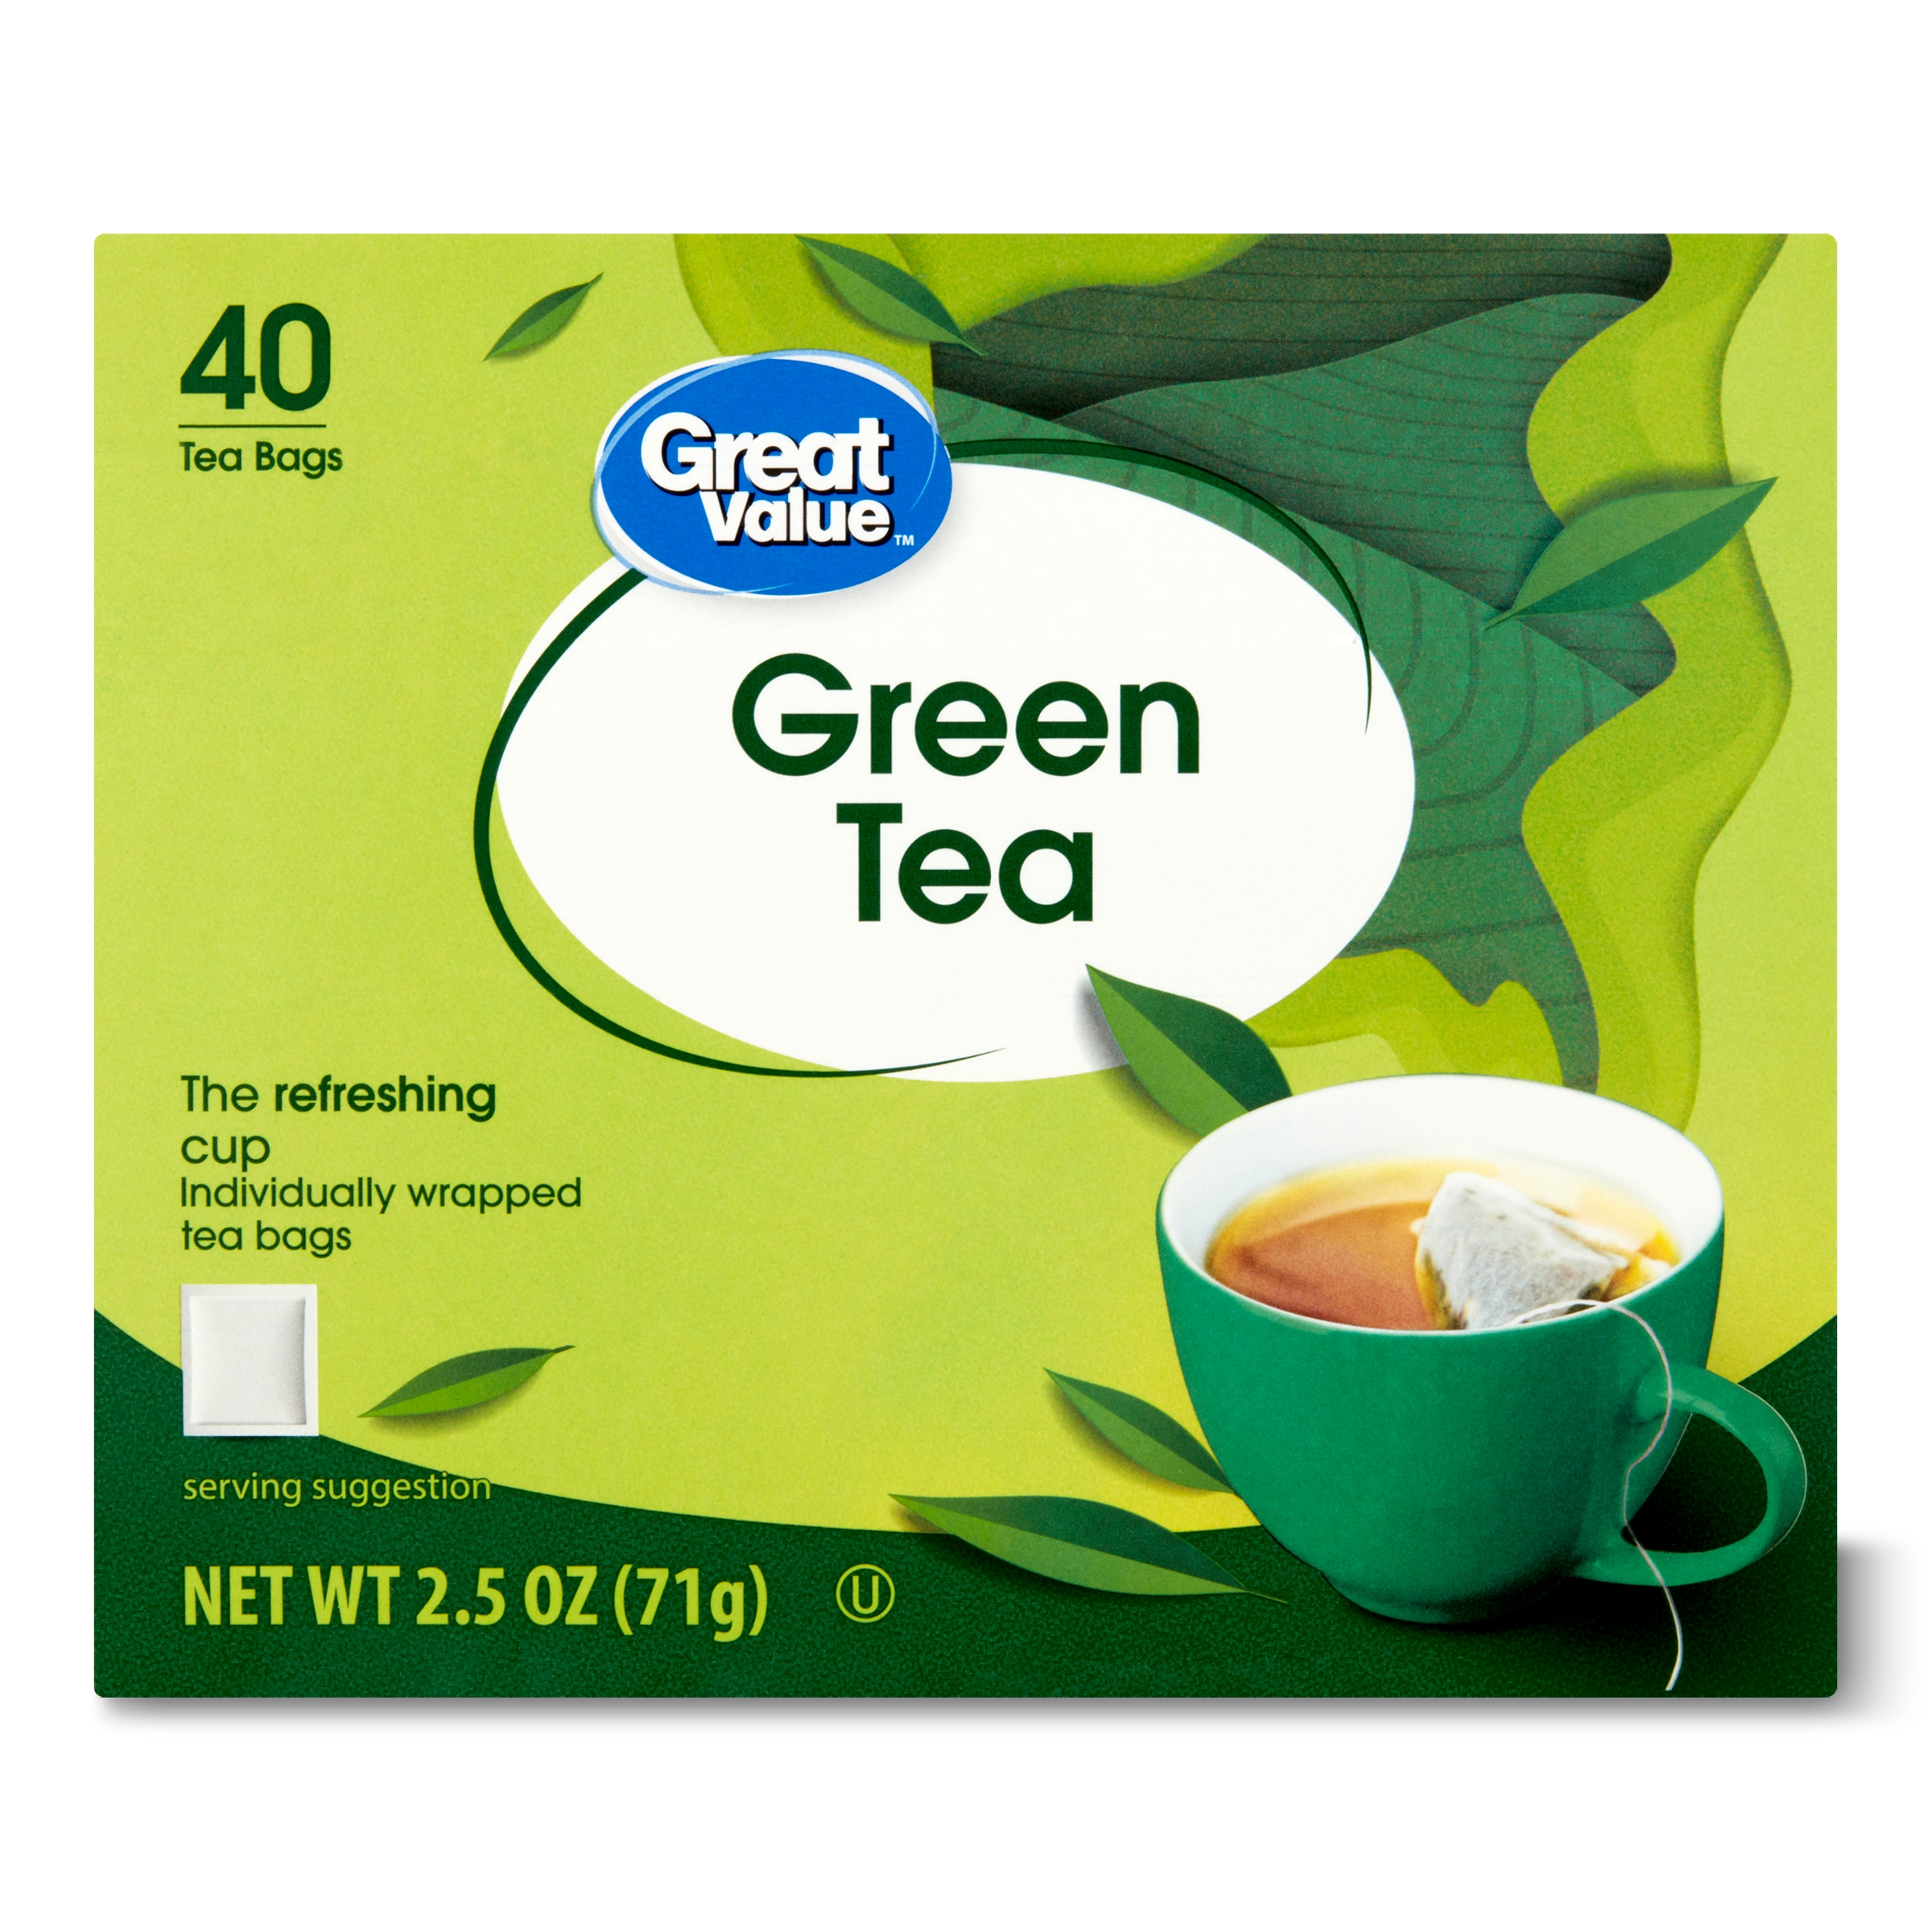 Great Value Green Tea Bags, 2.5 oz, 40 Count - image 1 of 7